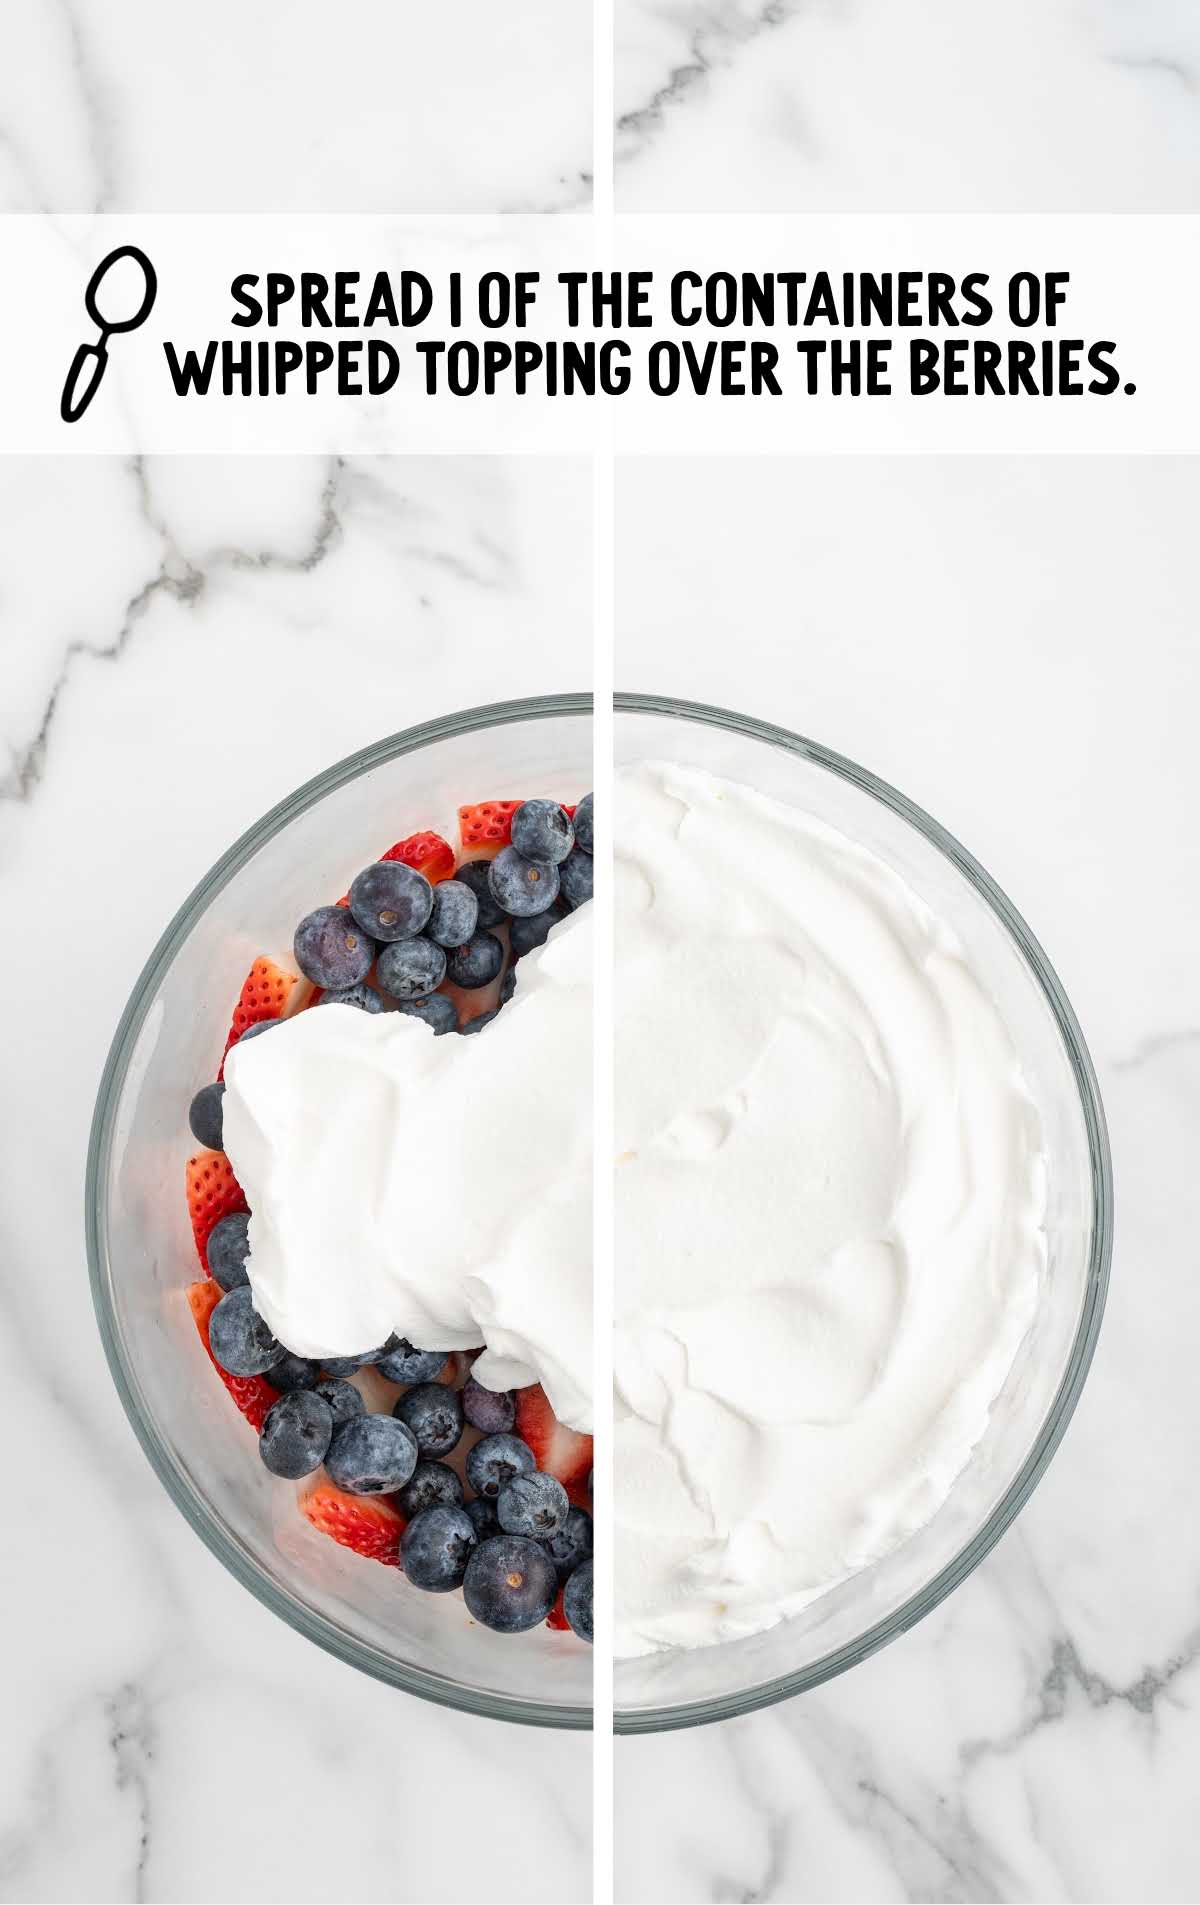 whipped topping spread over the berries